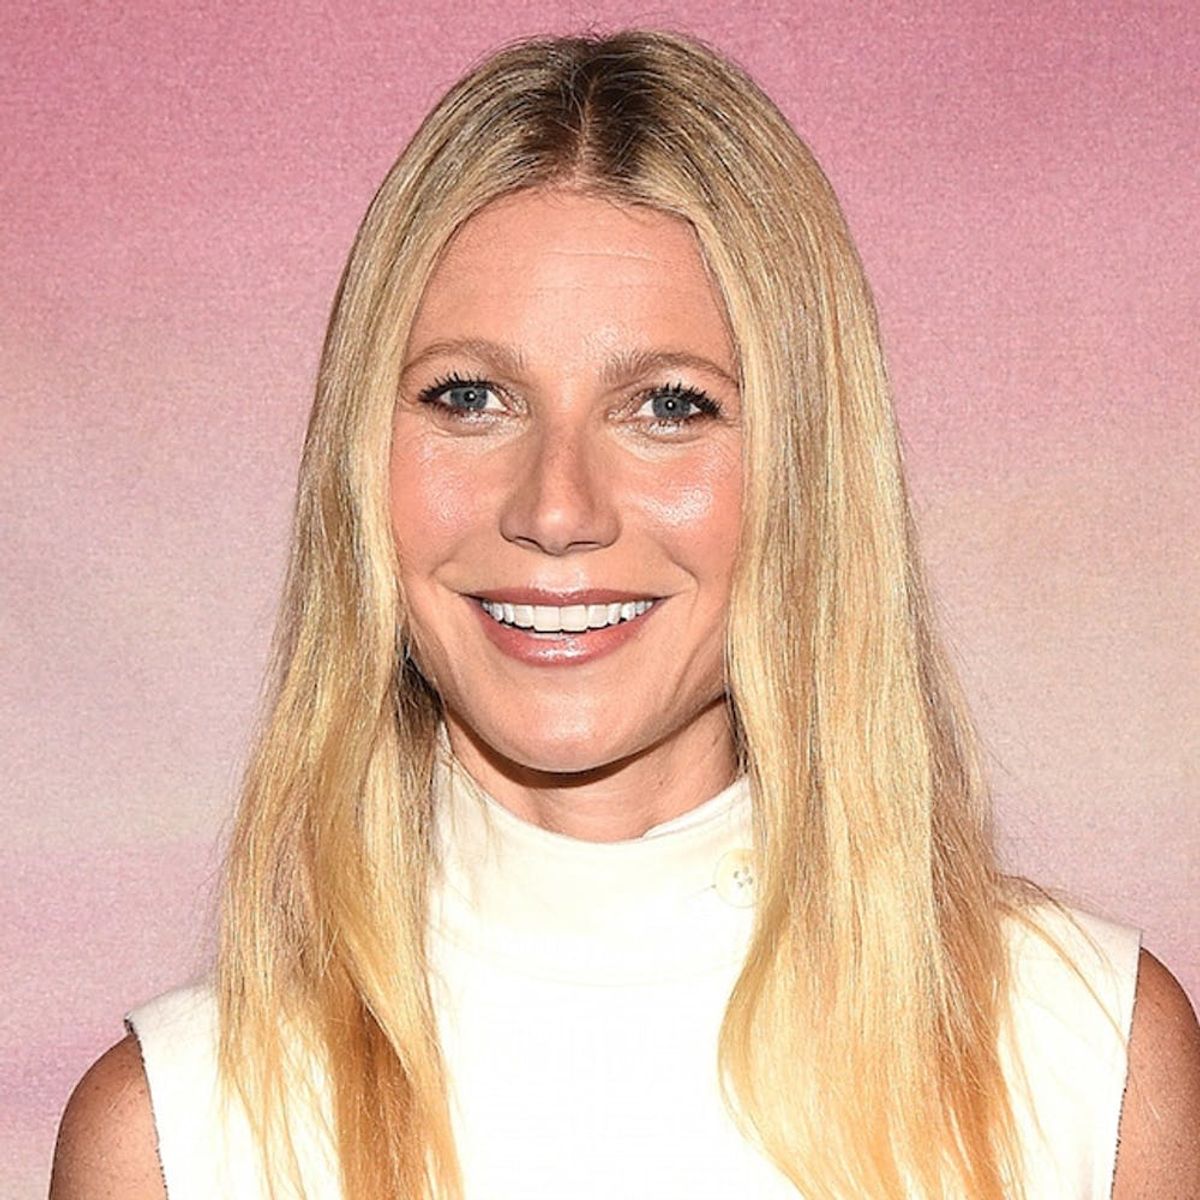 Why Goop Says Papaya Ointment Is the New Coconut Oil